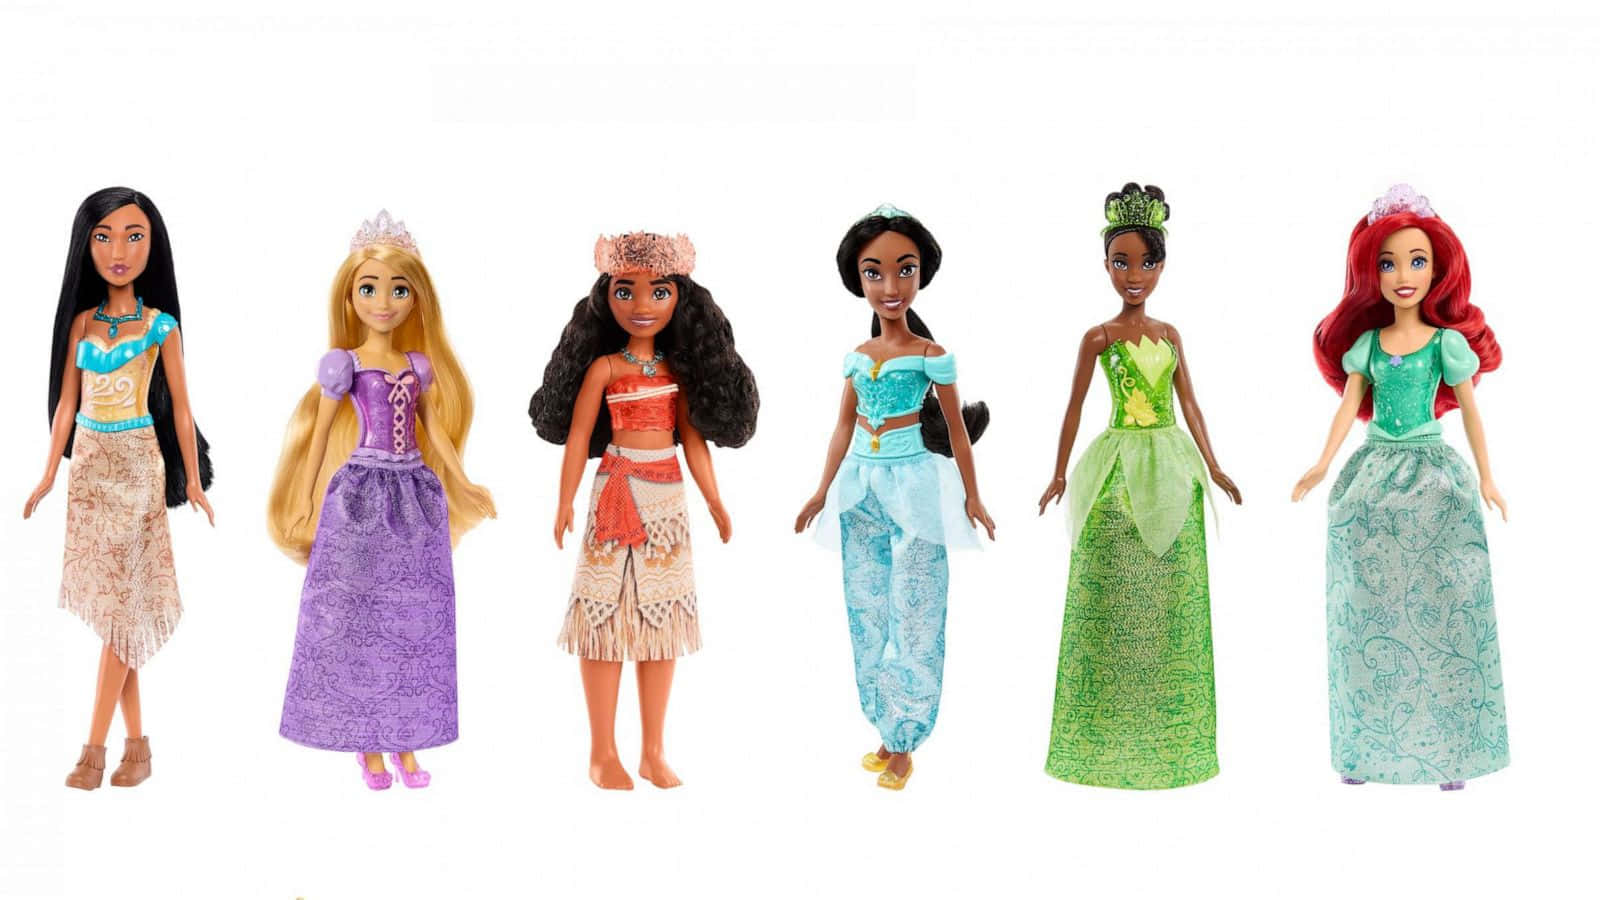 Disney Princess Dolls In Different Colors